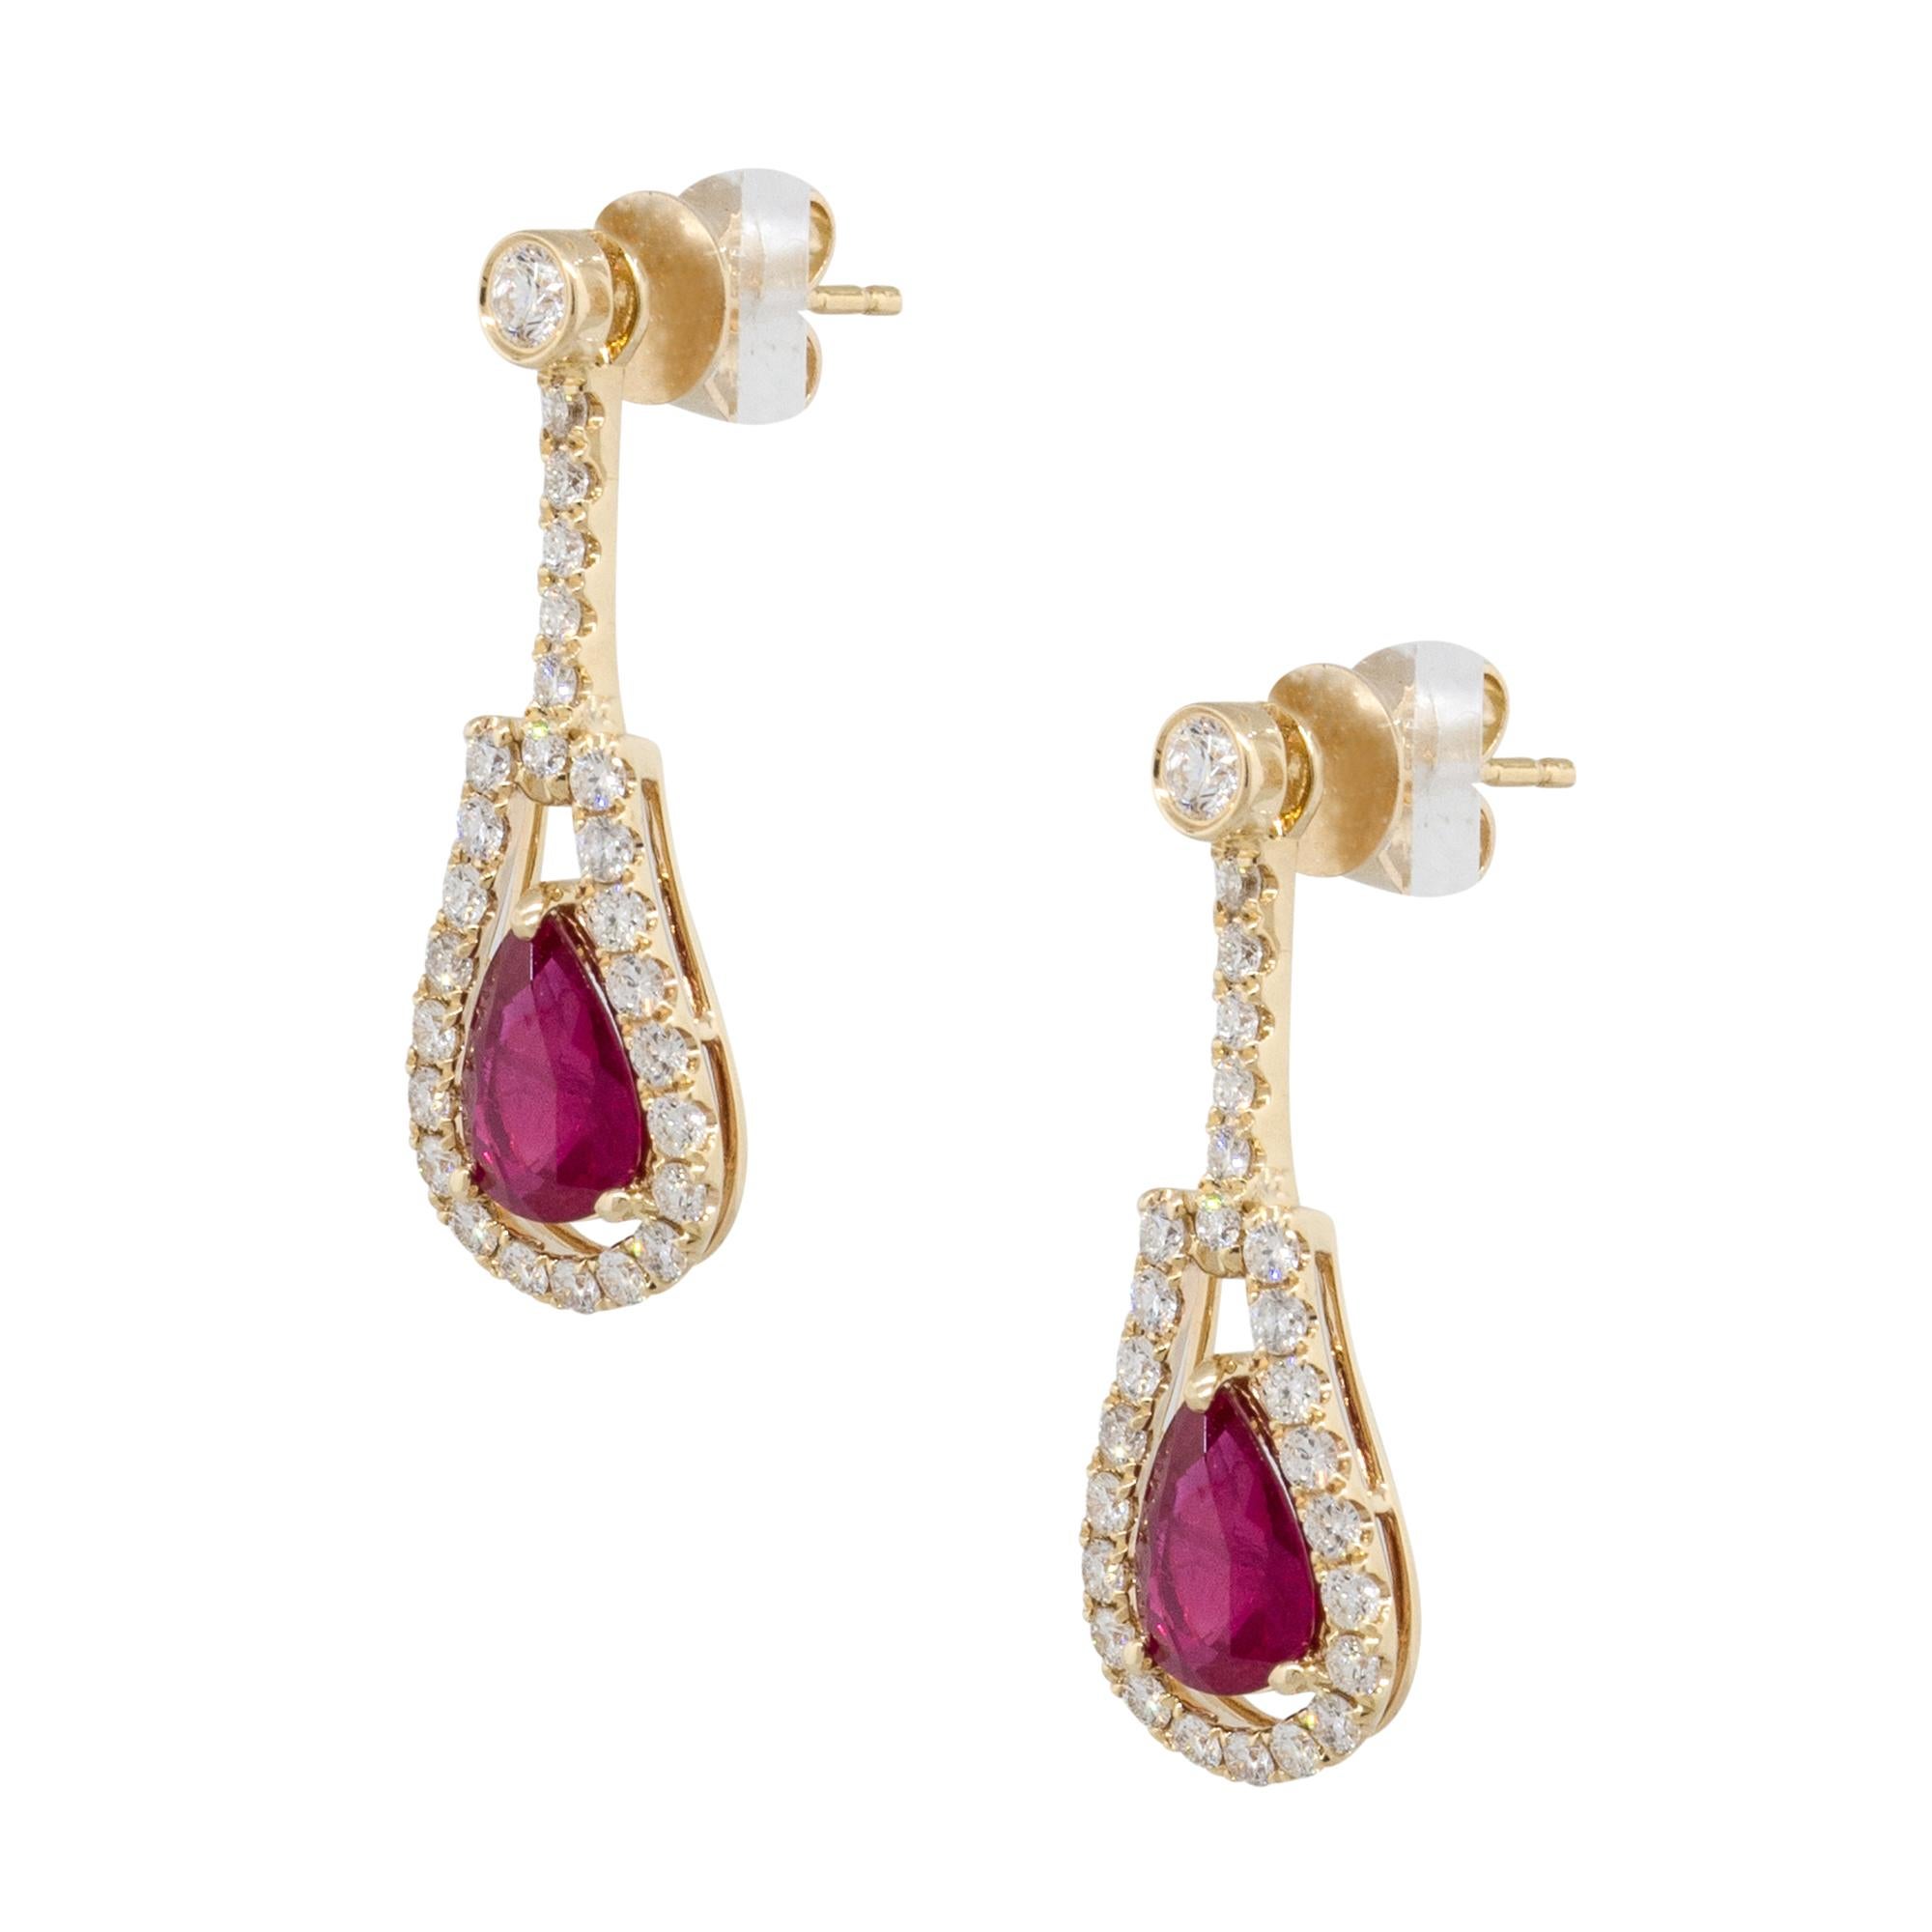 Material: 14k yellow Gold
Style: Ruby Dangle Earrings With Diamonds
Gemstone Details:	Approx. 2.55ctw of pear shape Rubies
Diamond Details: Approx. 1.02ctw of round cut Diamonds. Diamonds are G/H in color and VS in clarity
Earring Measurements: